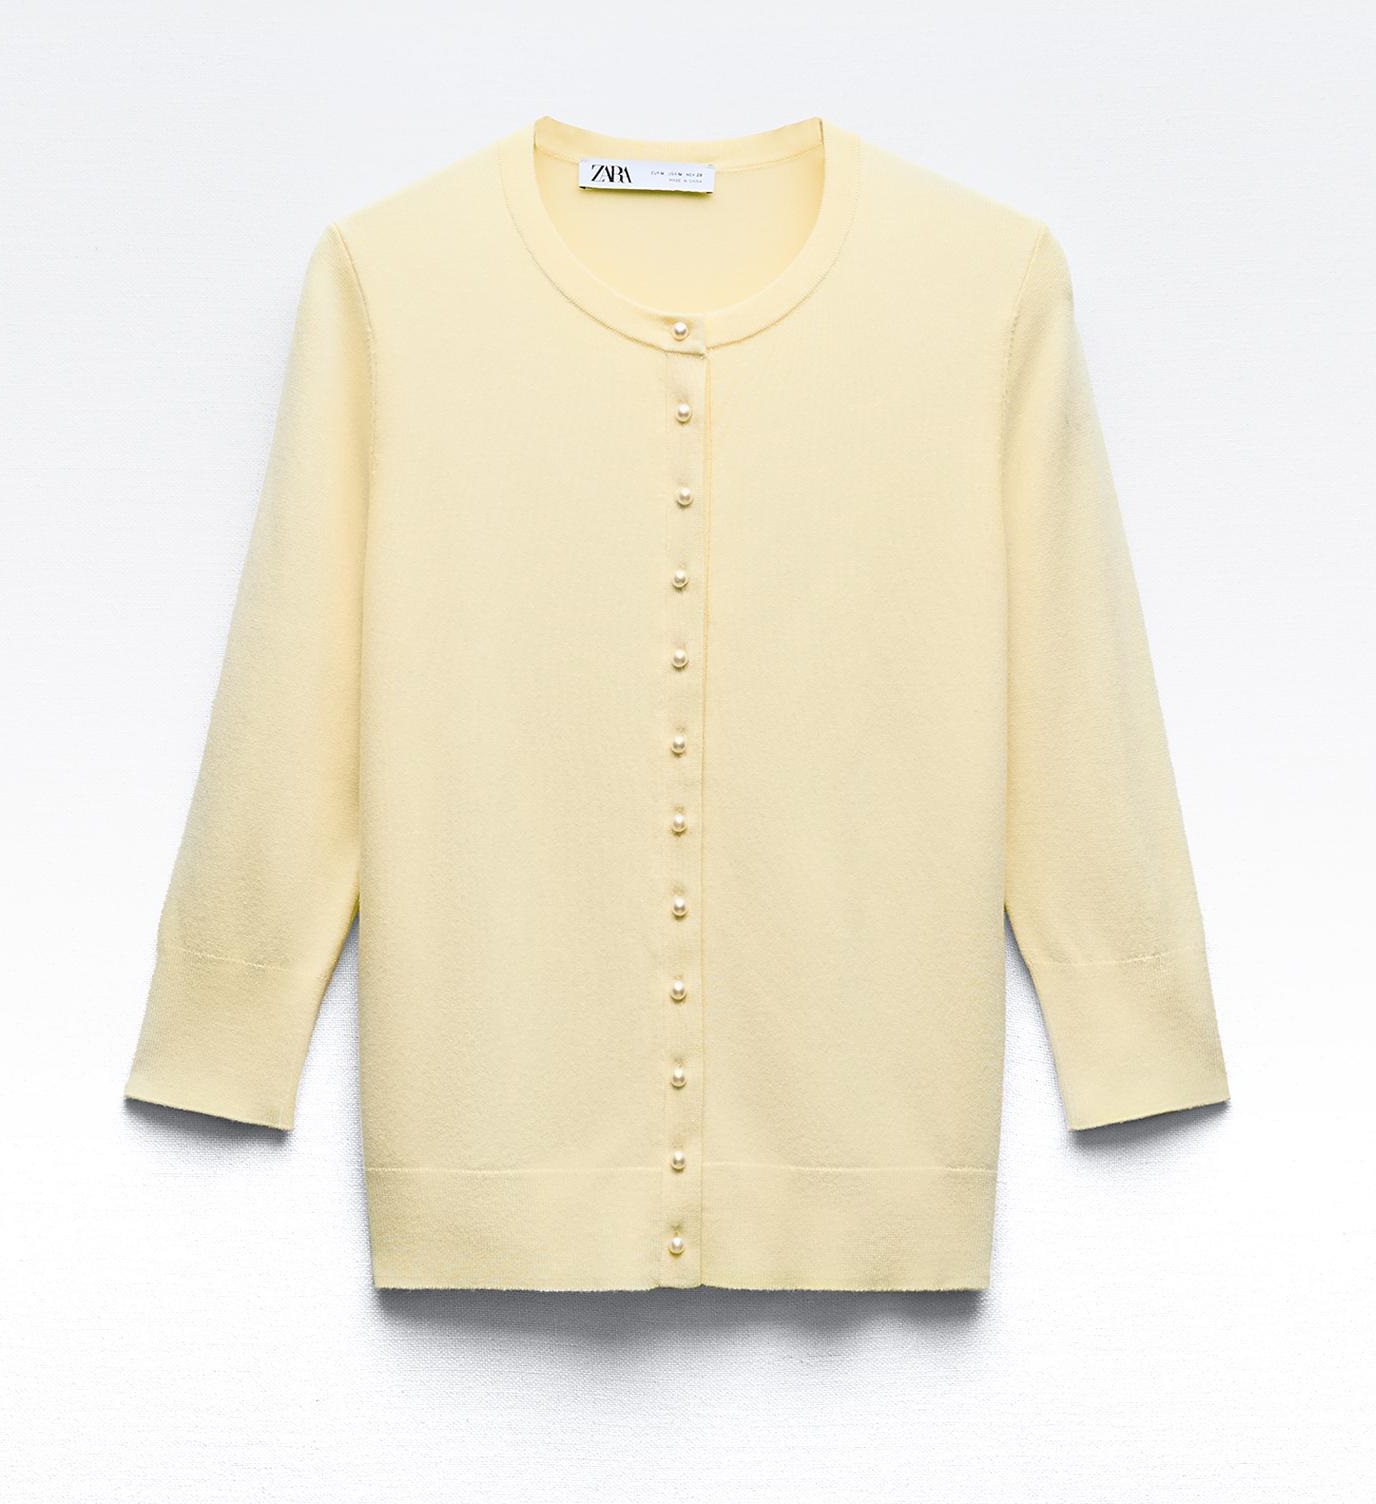 Кардиган Zara Plain Knit With Faux Pearl Buttons, светло-желтый